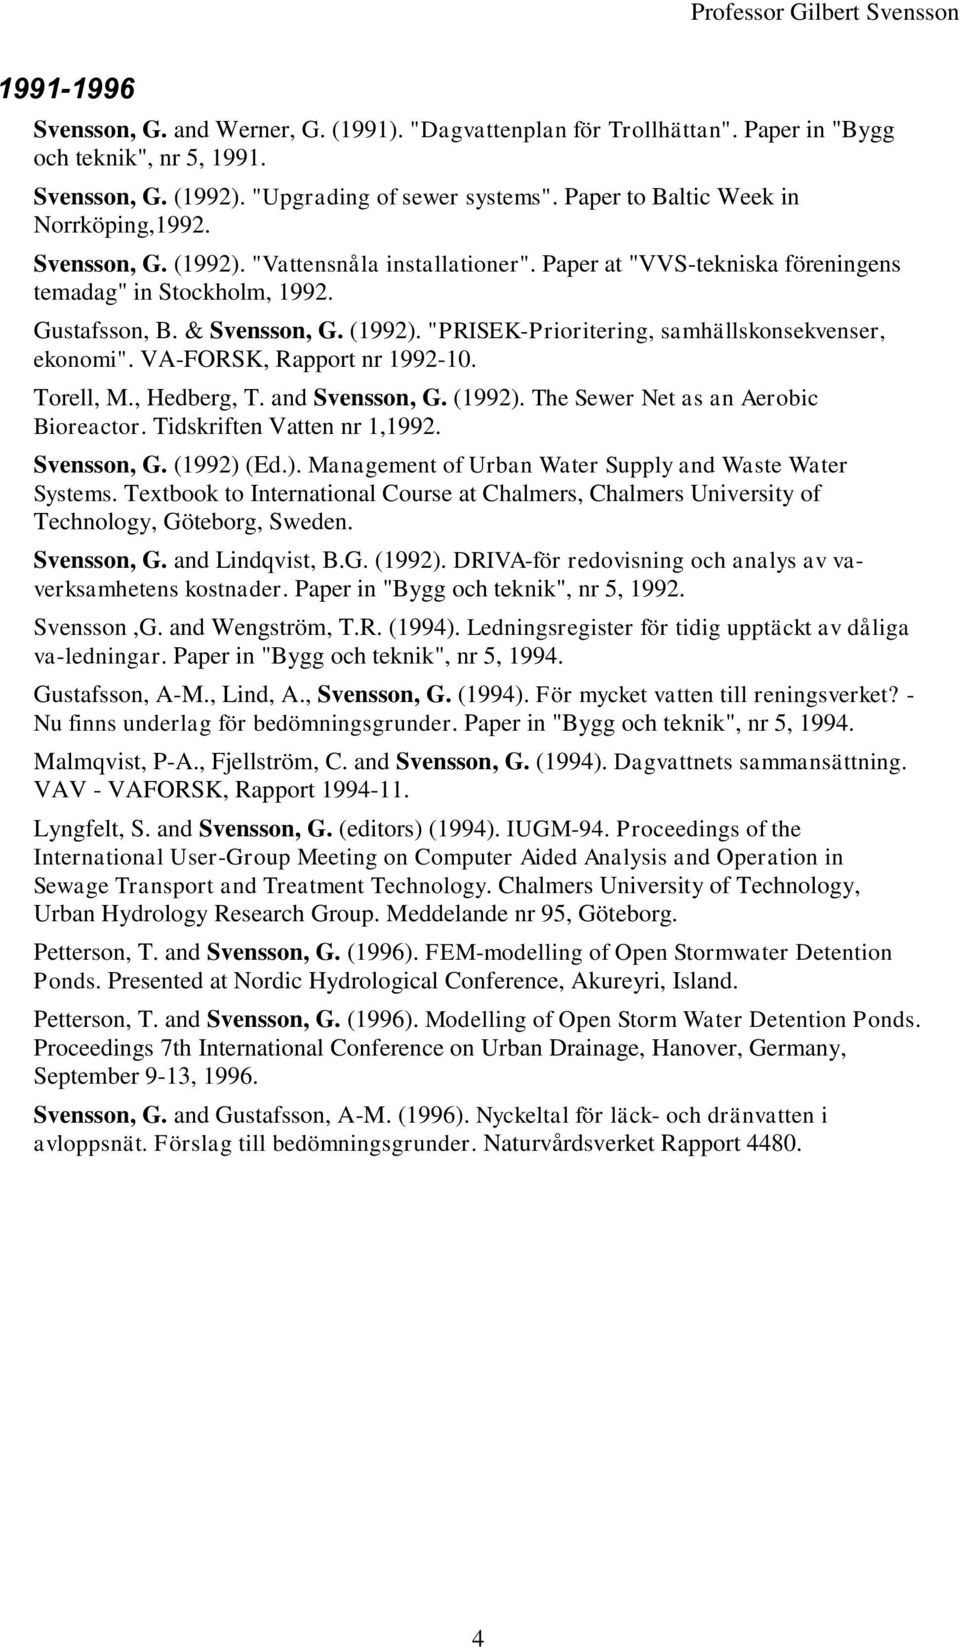 VA-FORSK, Rapport nr 1992-10. Torell, M., Hedberg, T. and Svensson, G. (1992). The Sewer Net as an Aerobic Bioreactor. Tidskriften Vatten nr 1,1992. Svensson, G. (1992) (Ed.). Management of Urban Water Supply and Waste Water Systems.